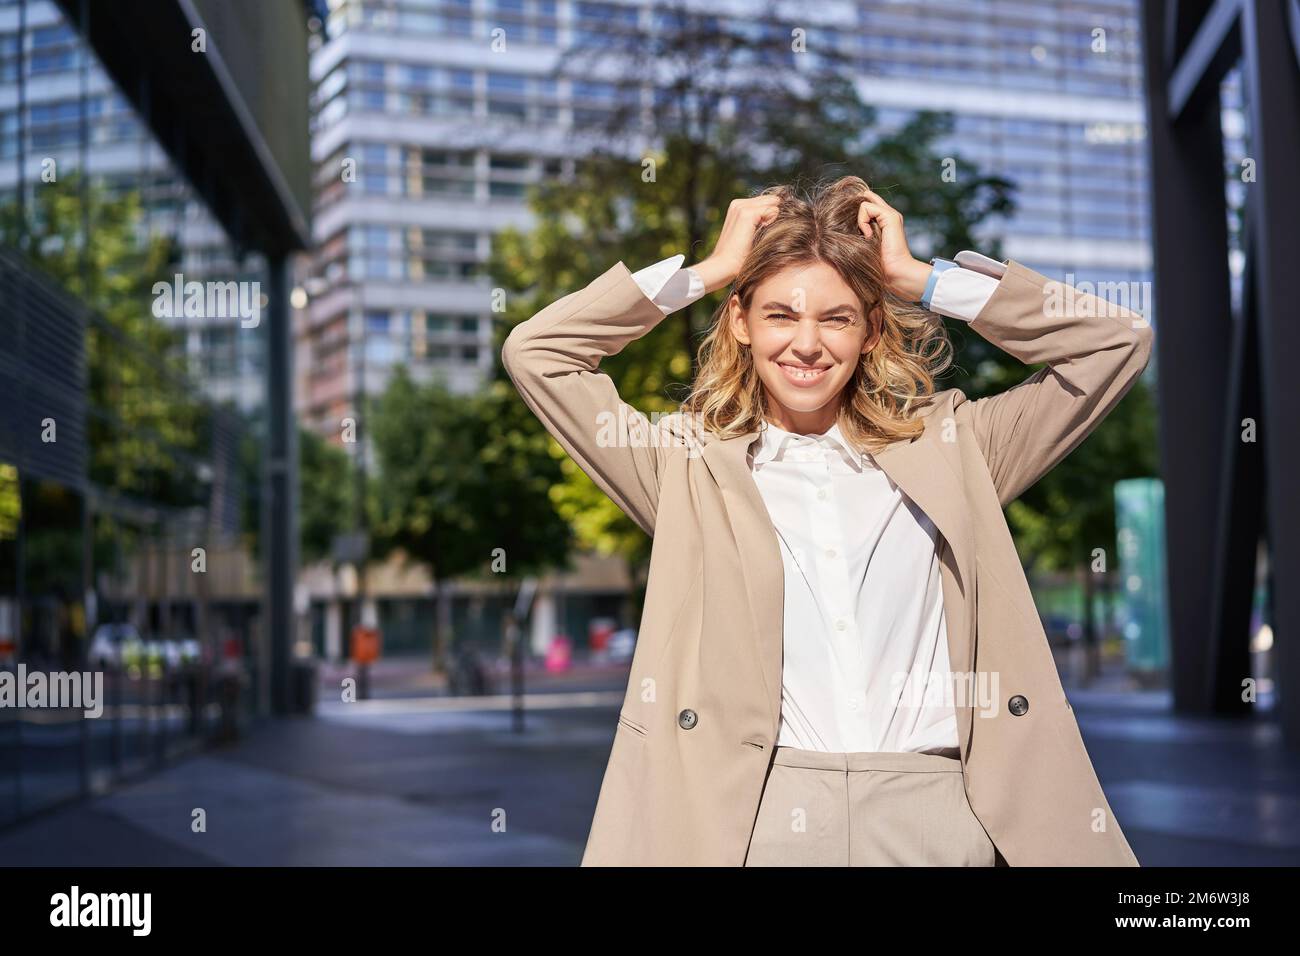 Stylish corporate woman, young lady boss in suit, looking confident and happy, posing outdoors on street Stock Photo